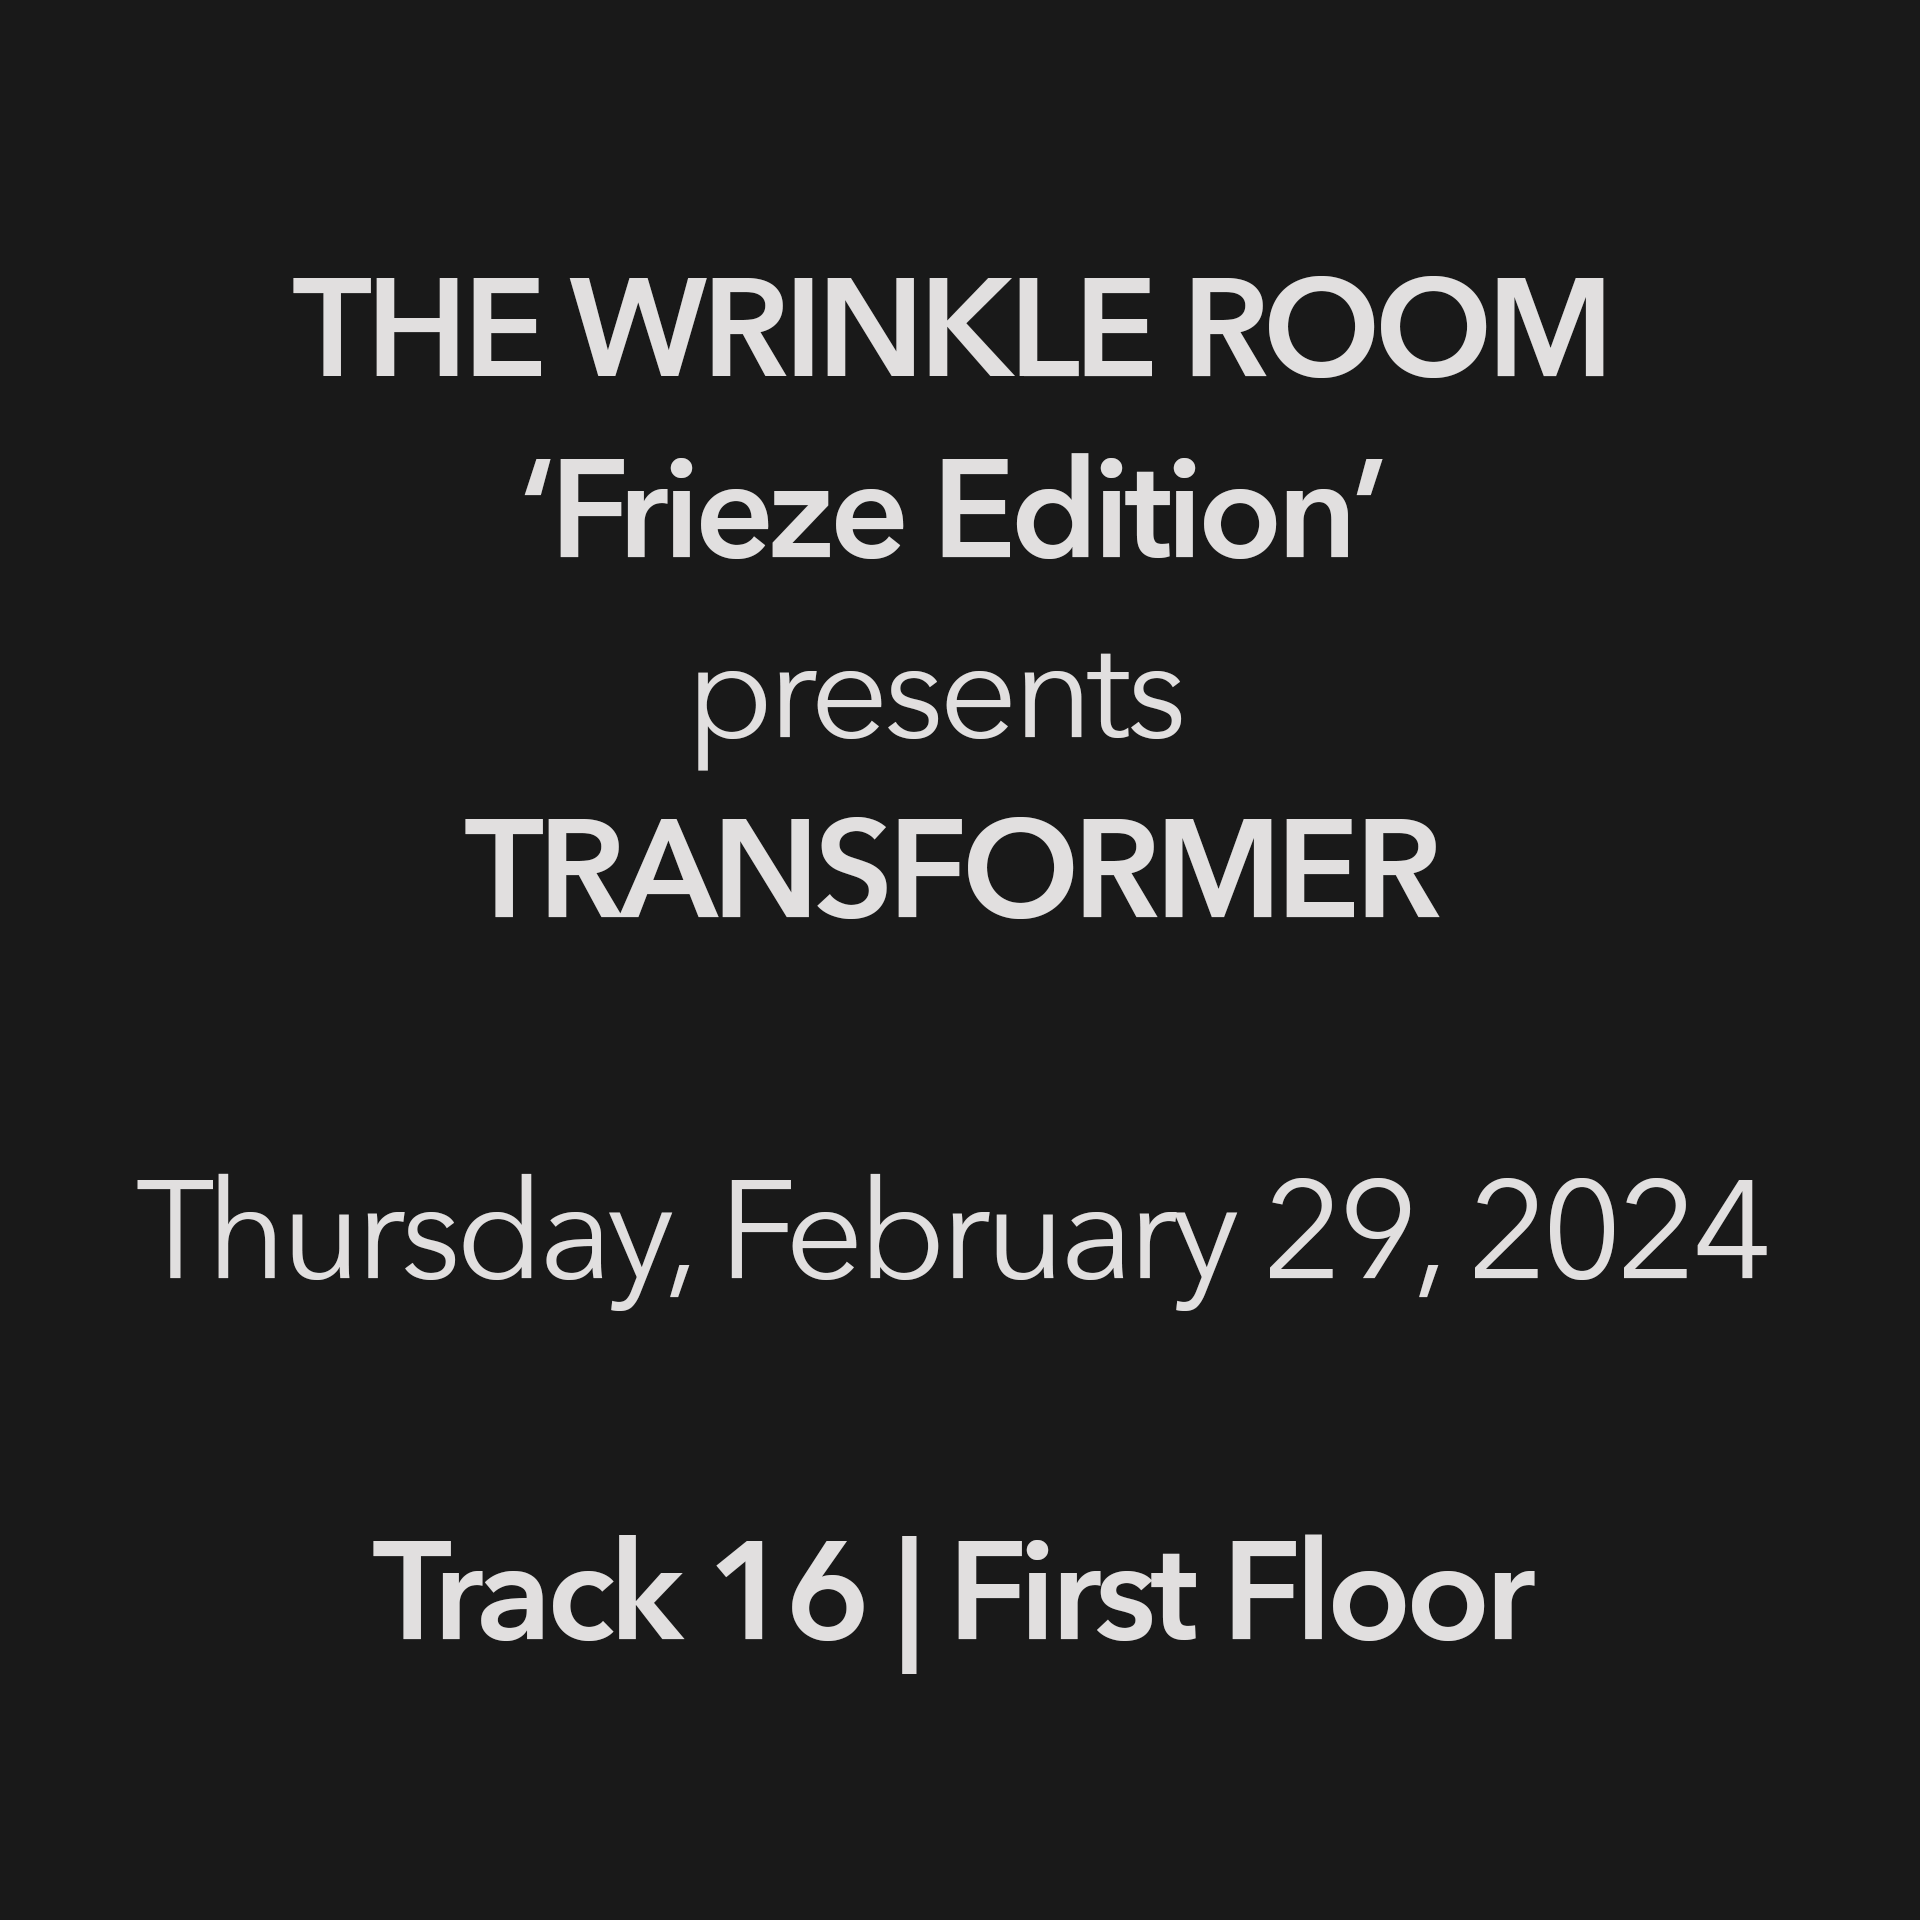 THE WRINKLE ROOM
‘Frieze Edition’
presents 
TRANSFORMER
Thursday, February 29, 2024
Track 16 | First Floor